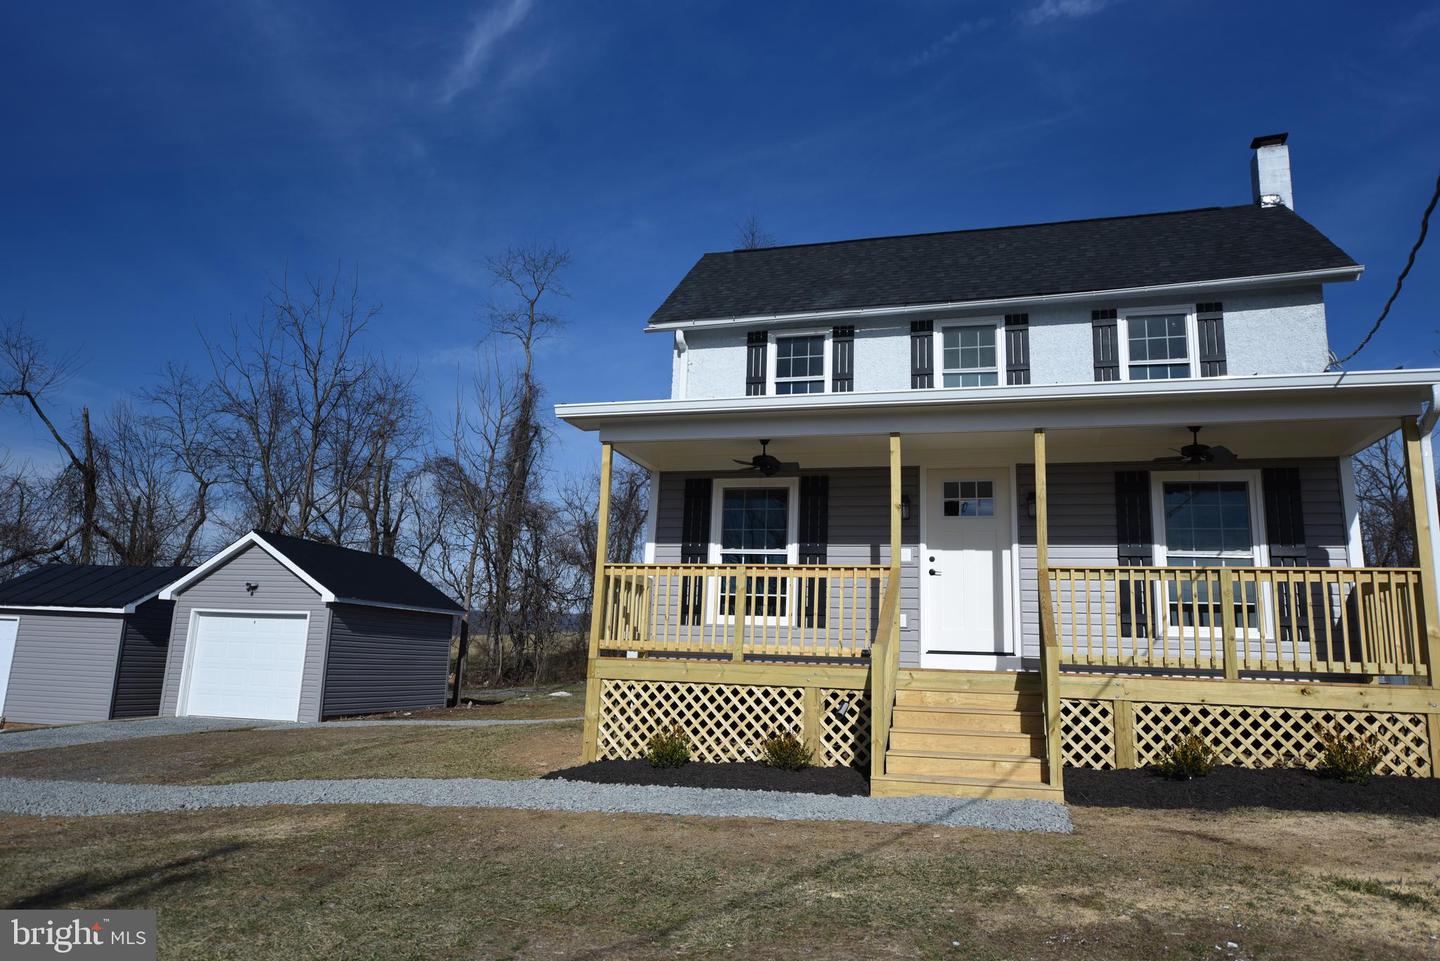 35212 PAXSON RD, ROUND HILL, Virginia 20141, 3 Bedrooms Bedrooms, ,2 BathroomsBathrooms,Residential,For sale,35212 PAXSON RD,VALO2064160 MLS # VALO2064160